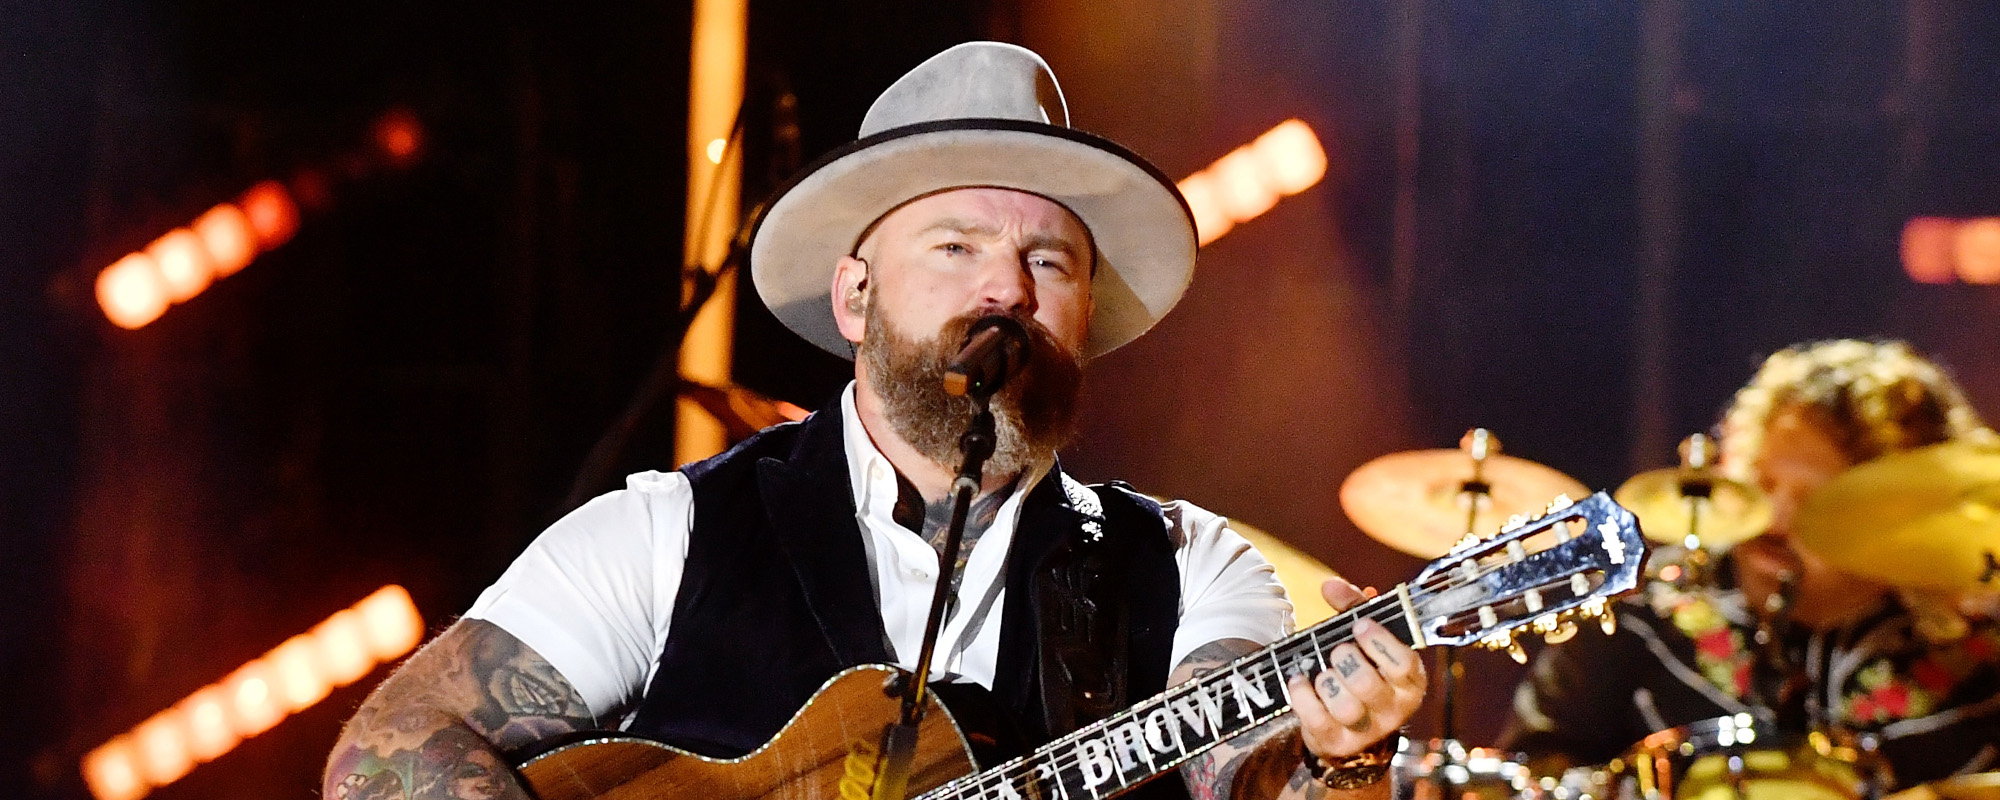 The Meaning Behind “Loving You Easy” by Zac Brown Band